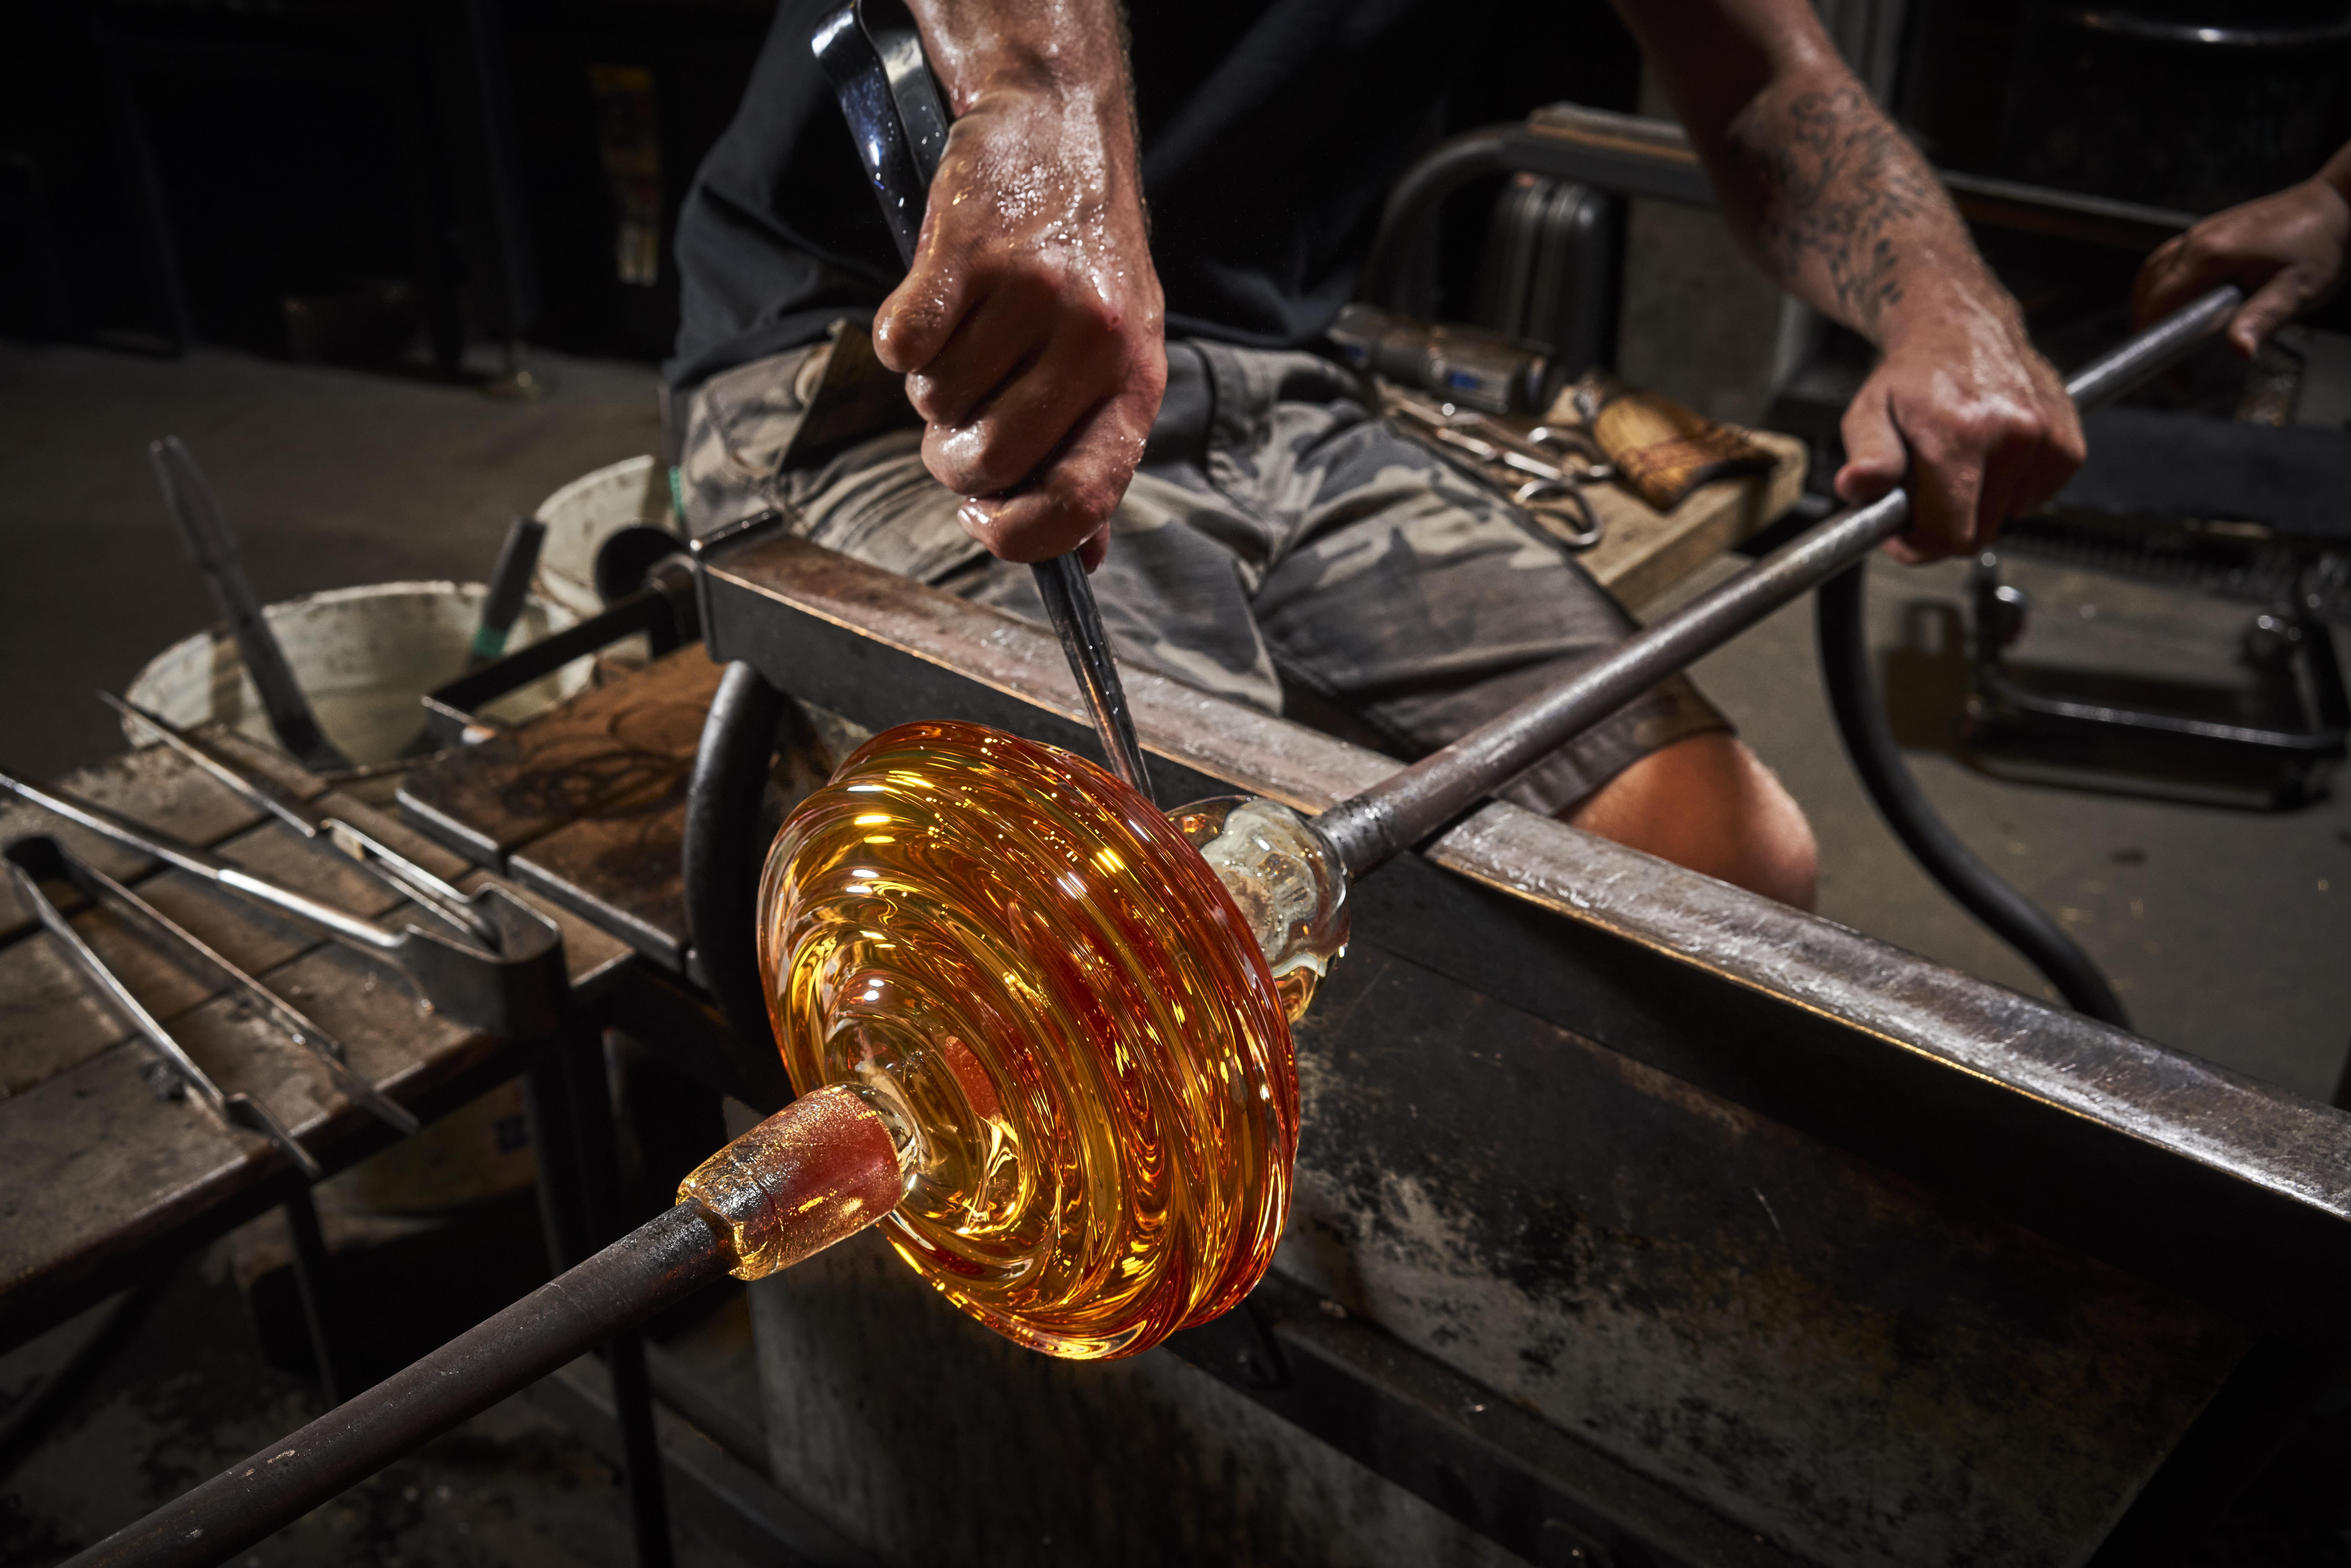 a human's hands hold a metal rod as they manipulate a rounded piece of orange glass